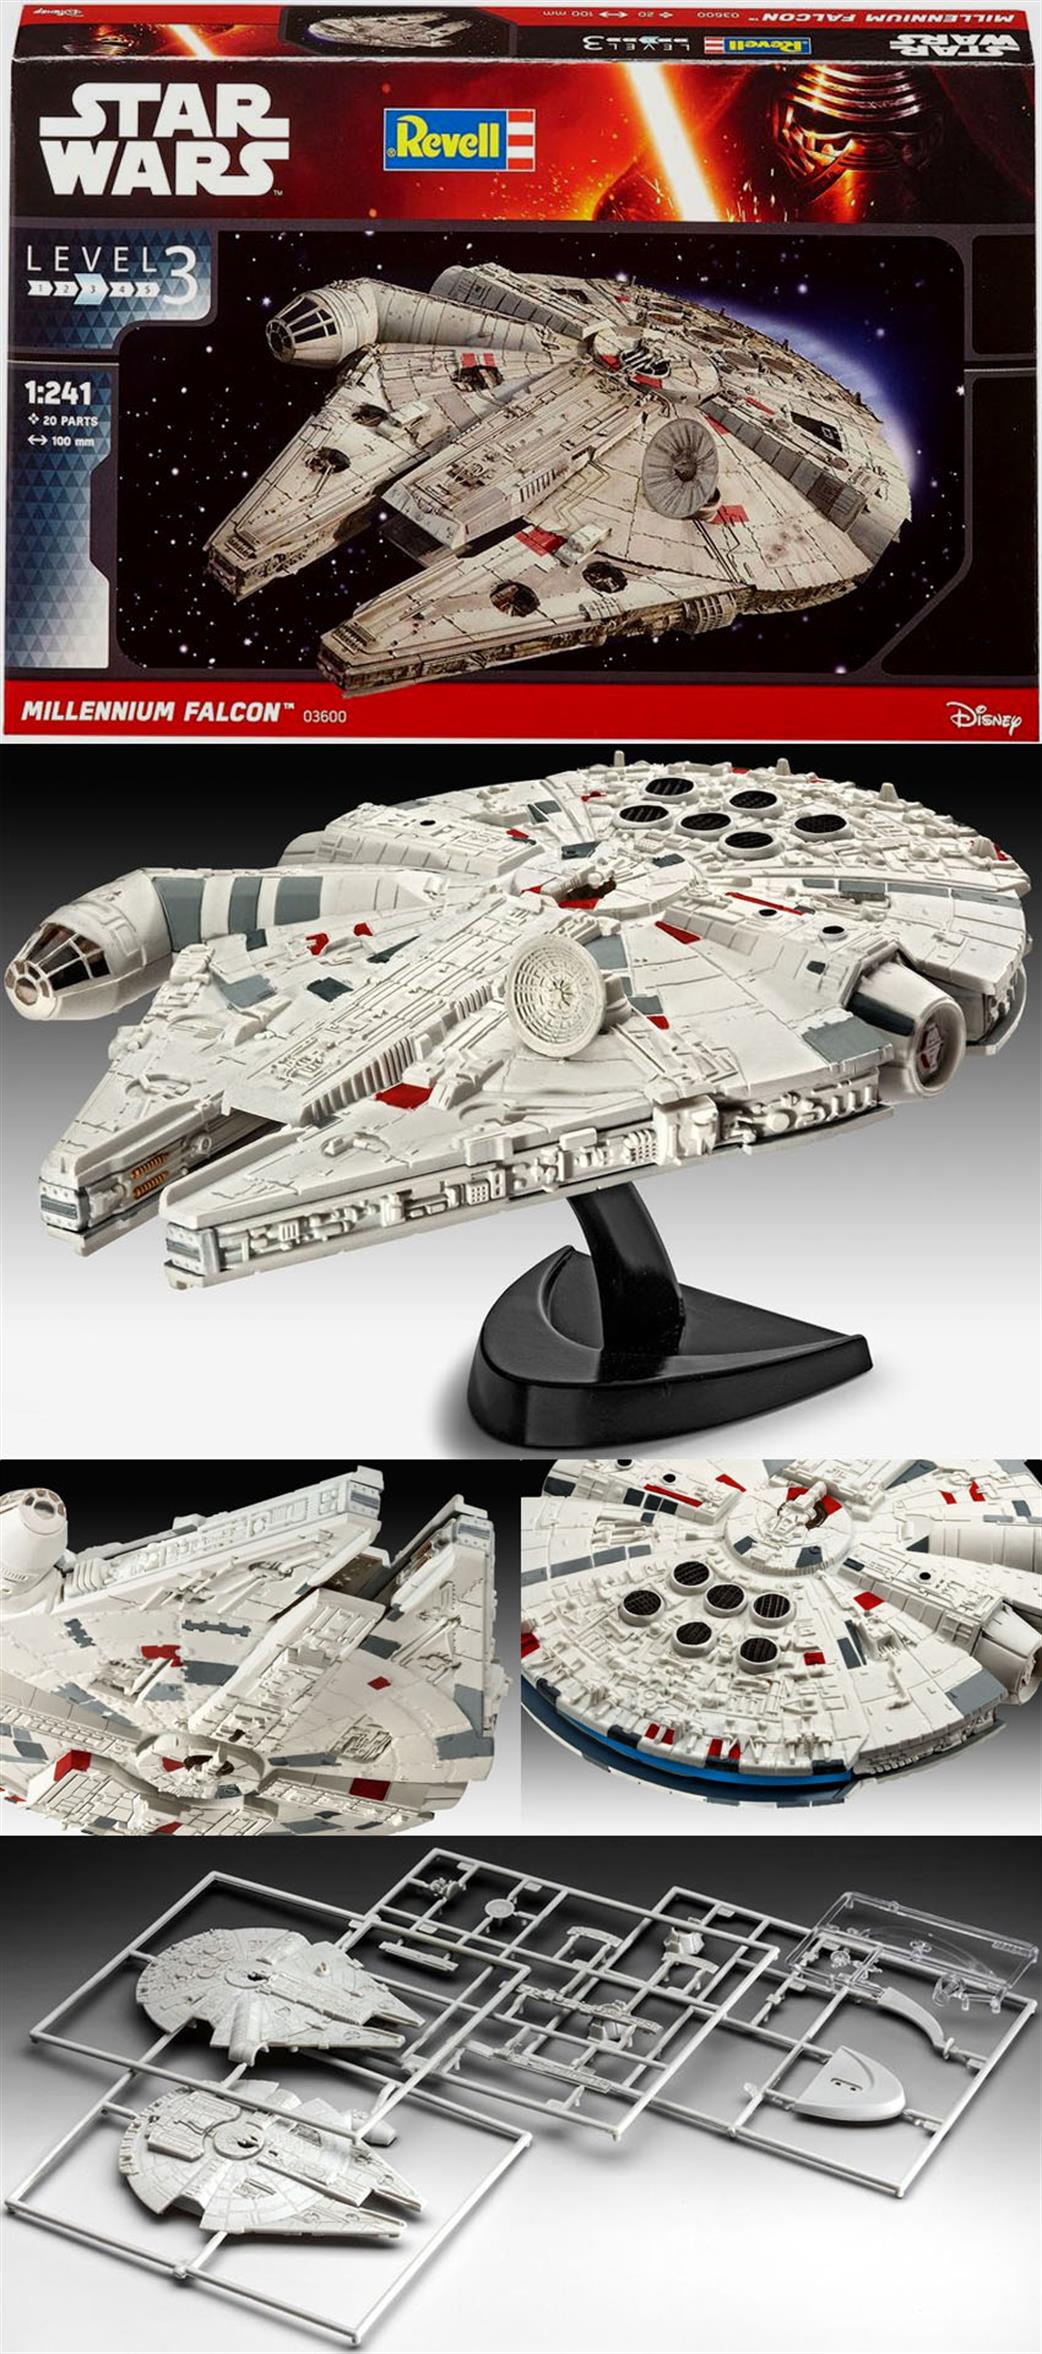 Revell 1/241 01100 Millennium Falcon from Star Wars